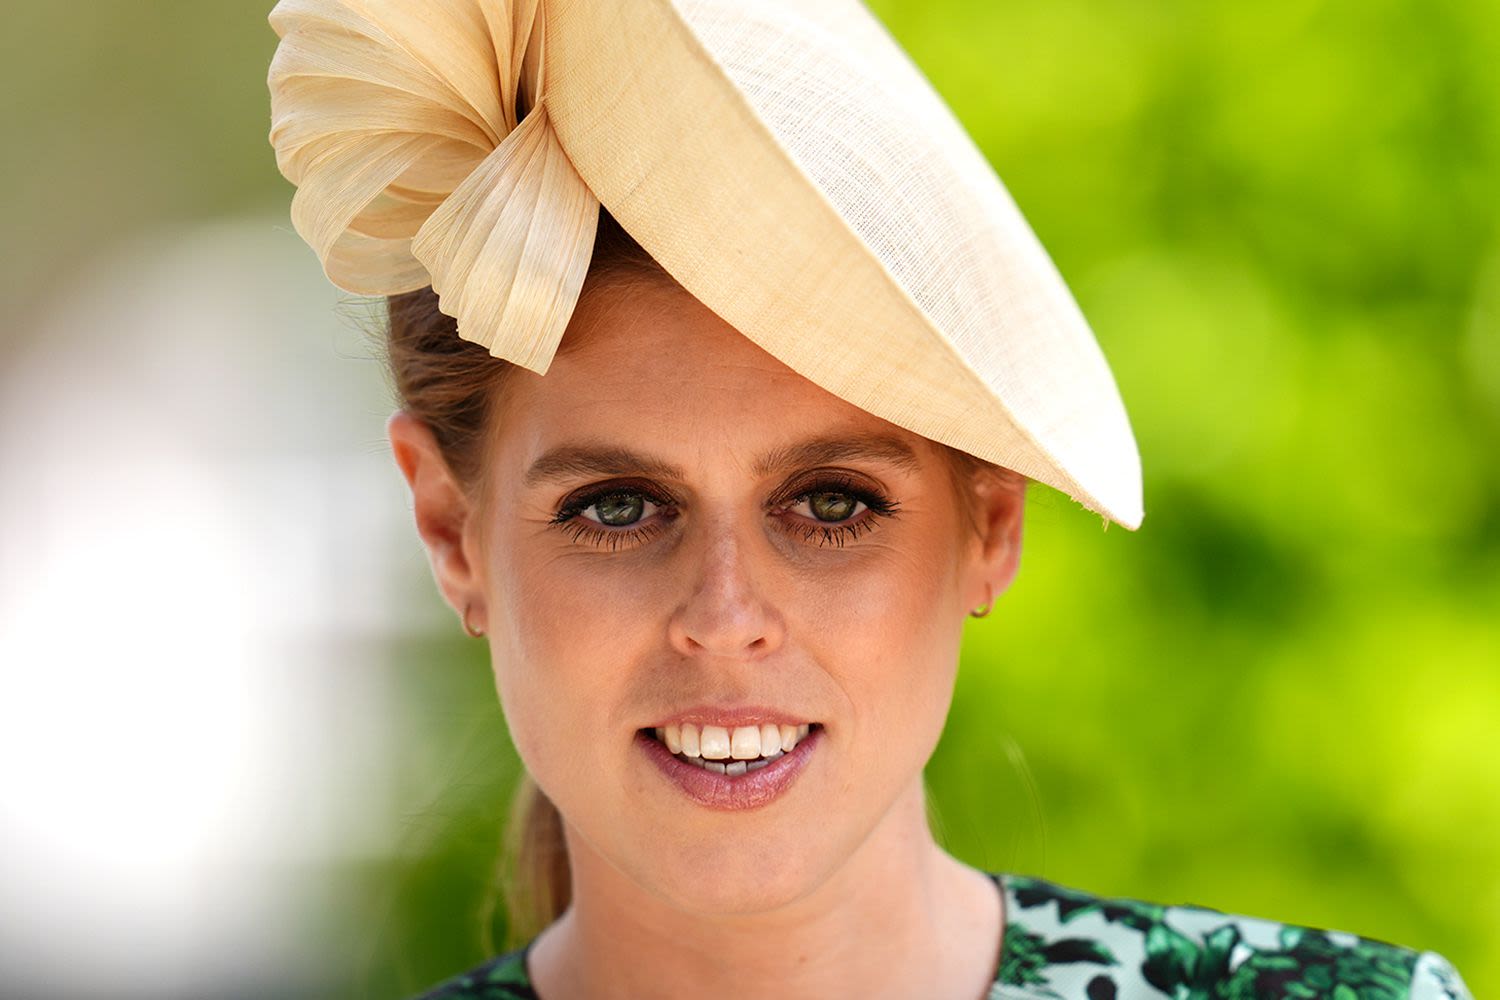 Princess Beatrice Tops Best Dressed List Along with a Surprising Royal Relative (It's Not Kate Middleton!)